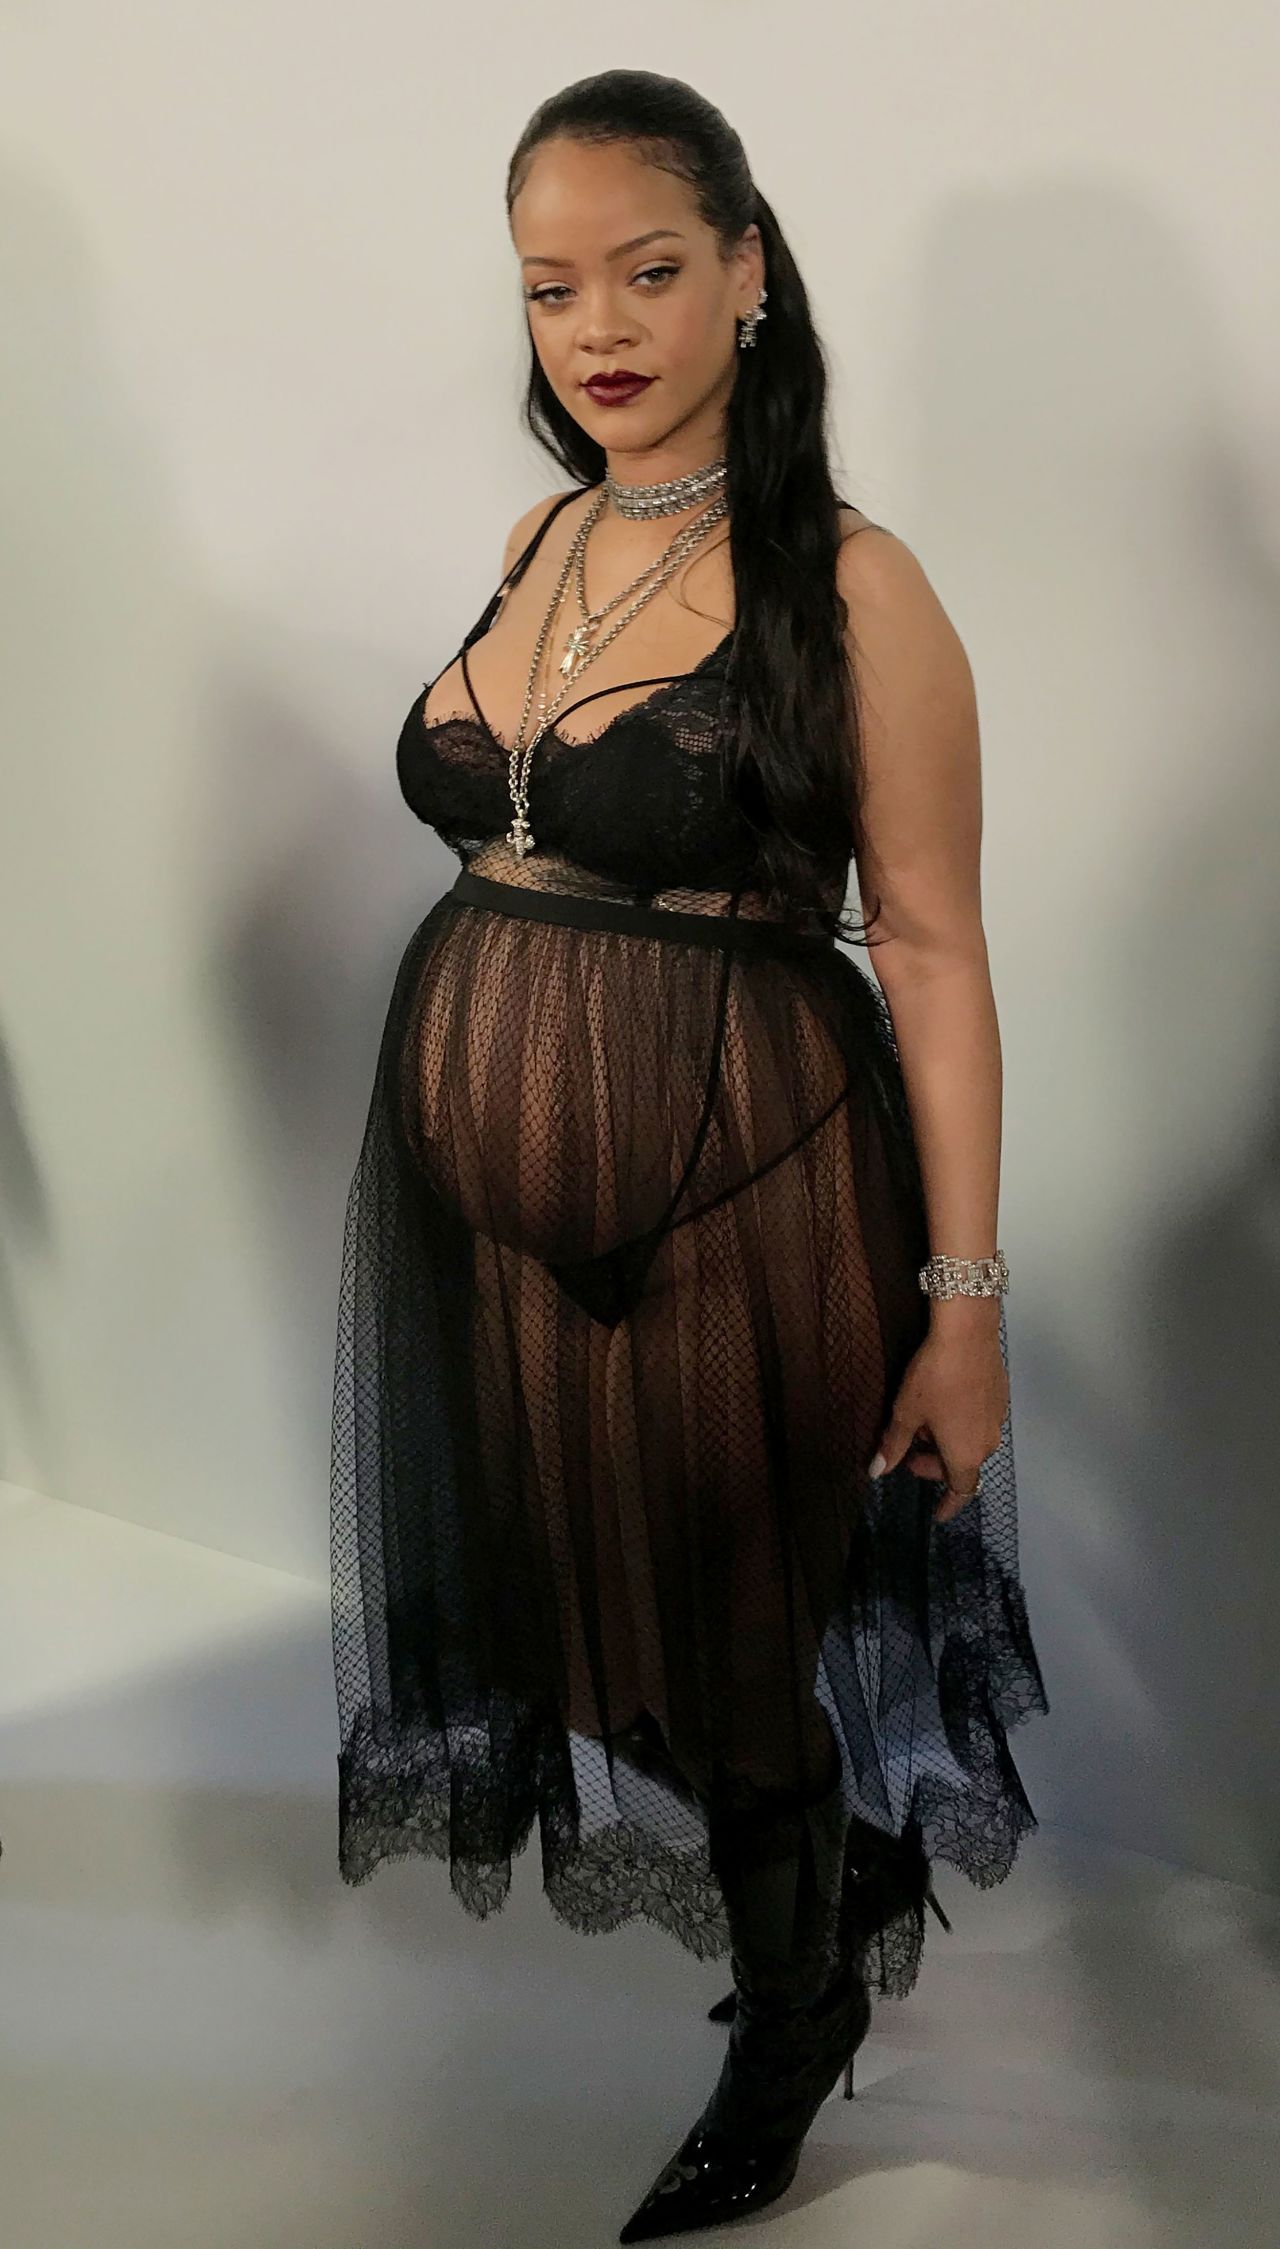 In her last trimester, Rihanna donned a lacy black bra and sheer skirt that revealed a tiny black thong while attending Dior's Fall-Winter 2022 show at Paris Fashion Week last year.